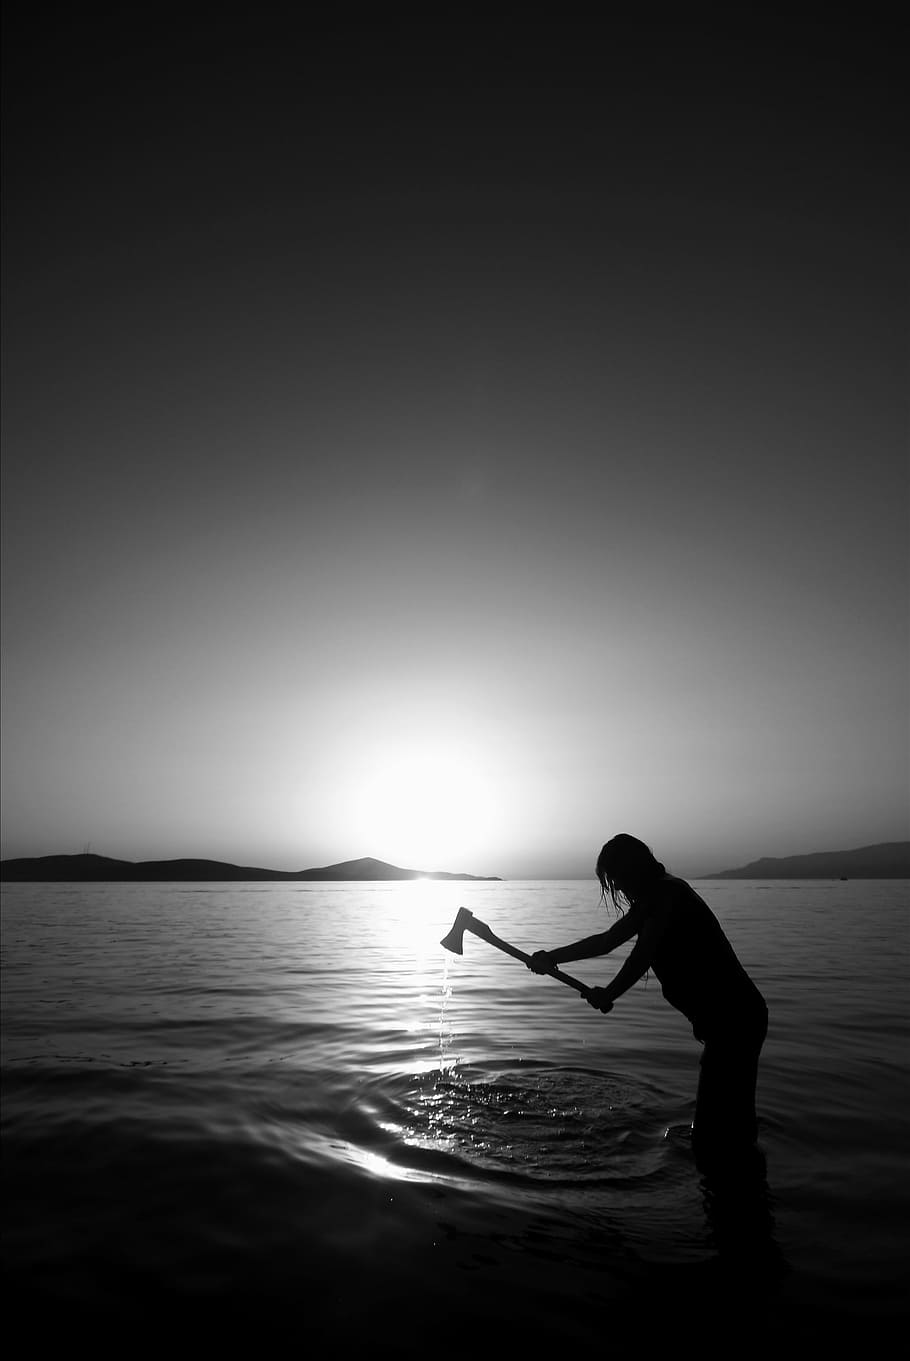 silhouette photo of person holding axe on body of water, black and white